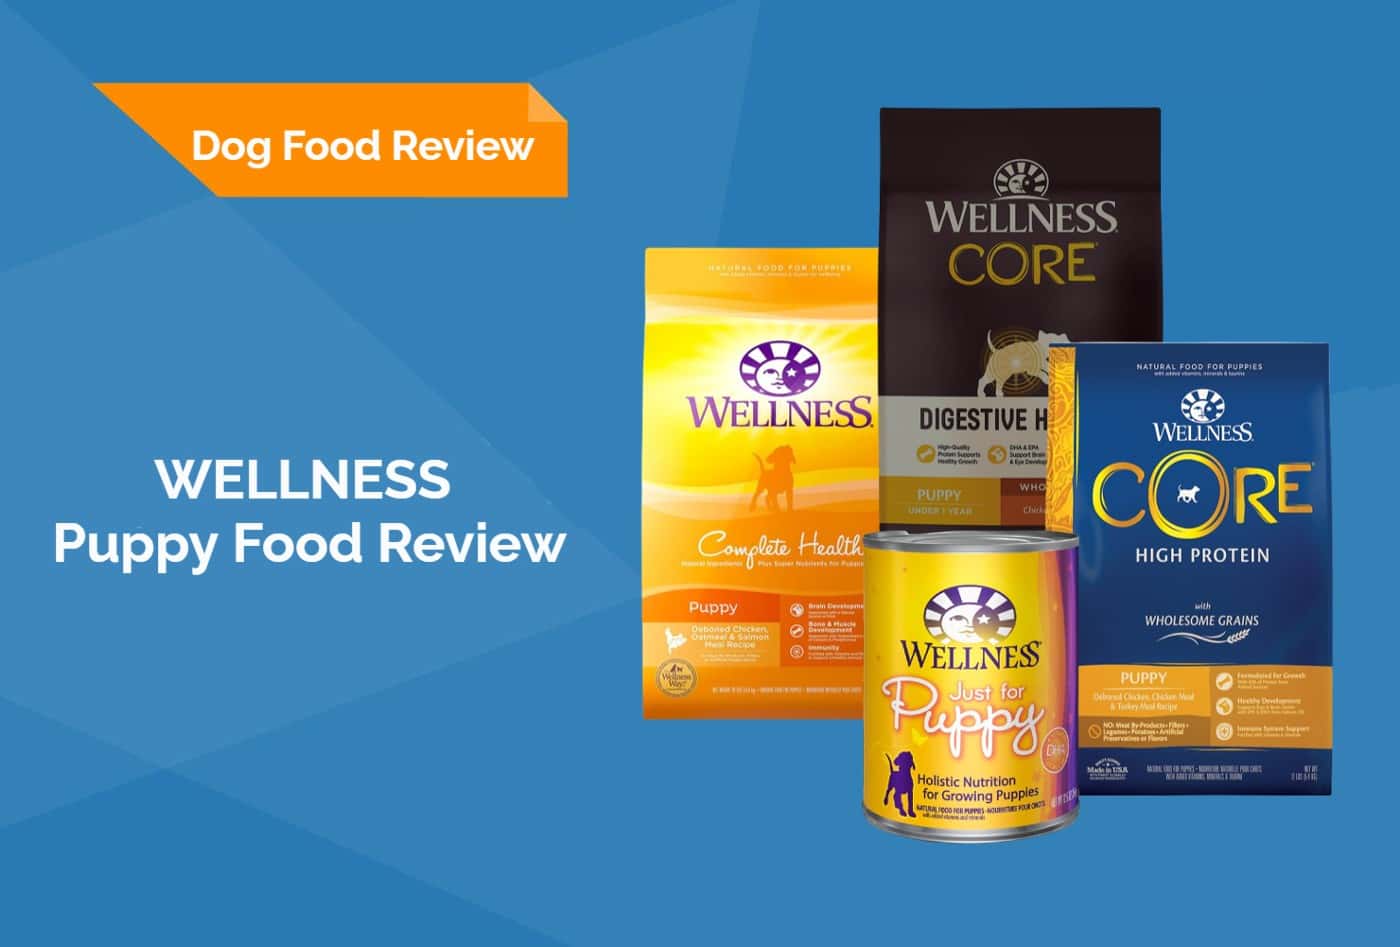 WELLNESS Puppy Food Review